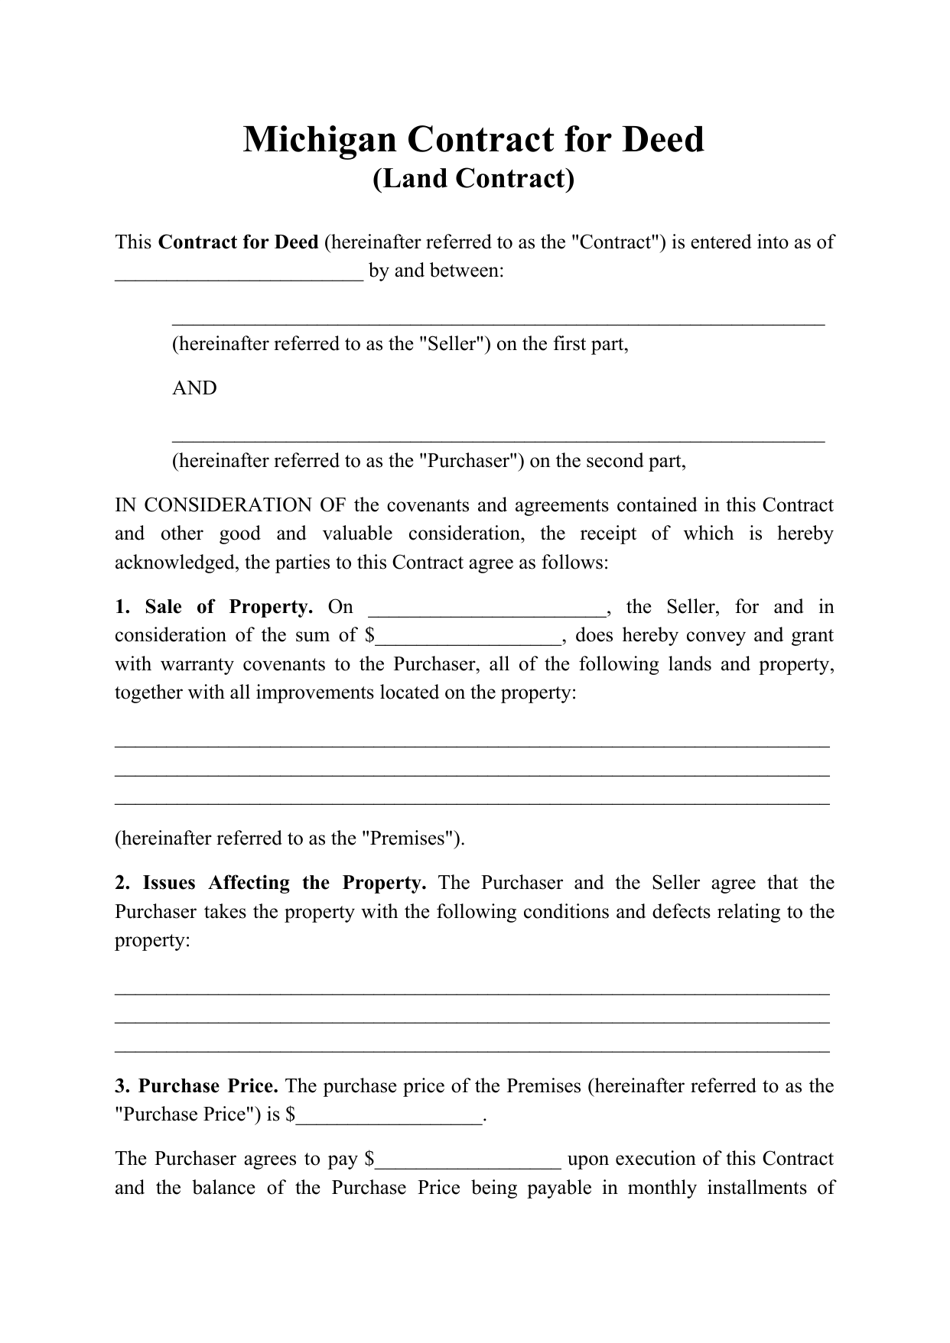 Contract for Deed (Land Contract) - Michigan, Page 1